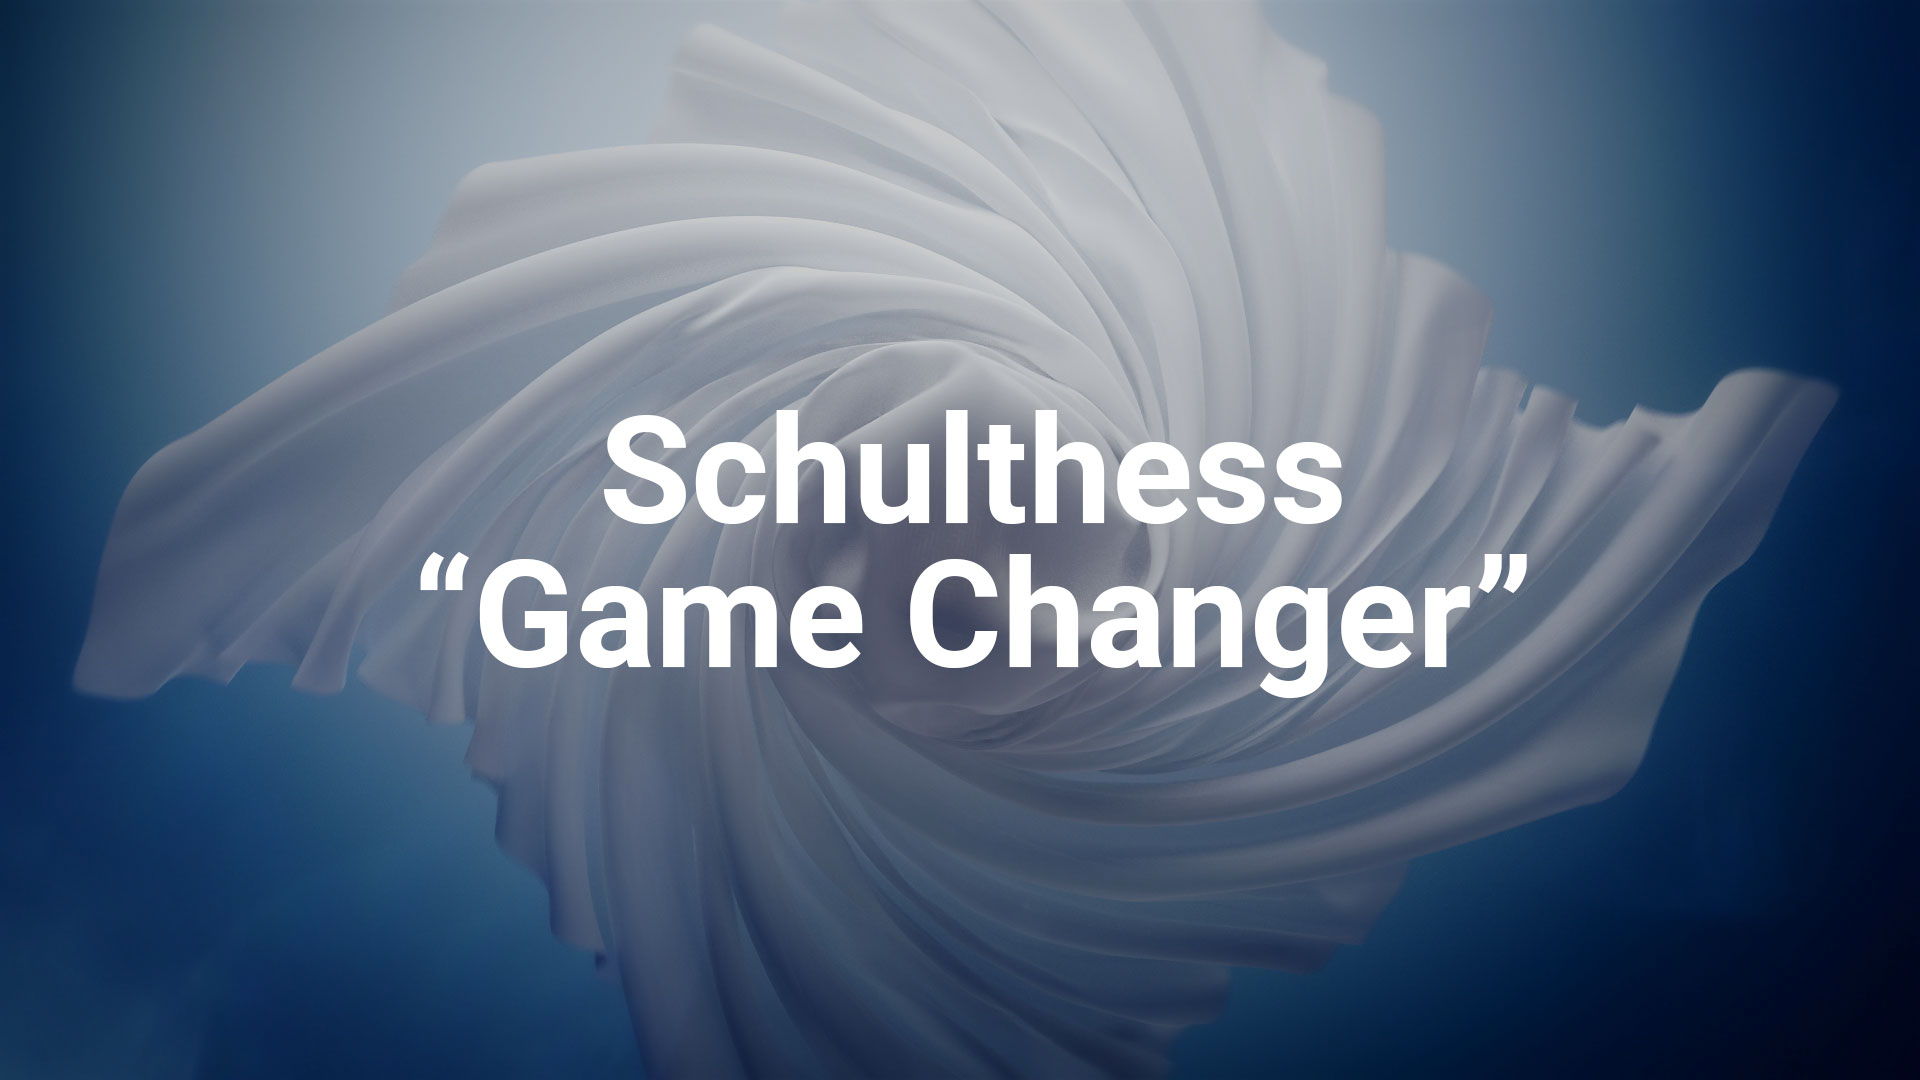 Schulthess<br /> “The Game Changer_port”